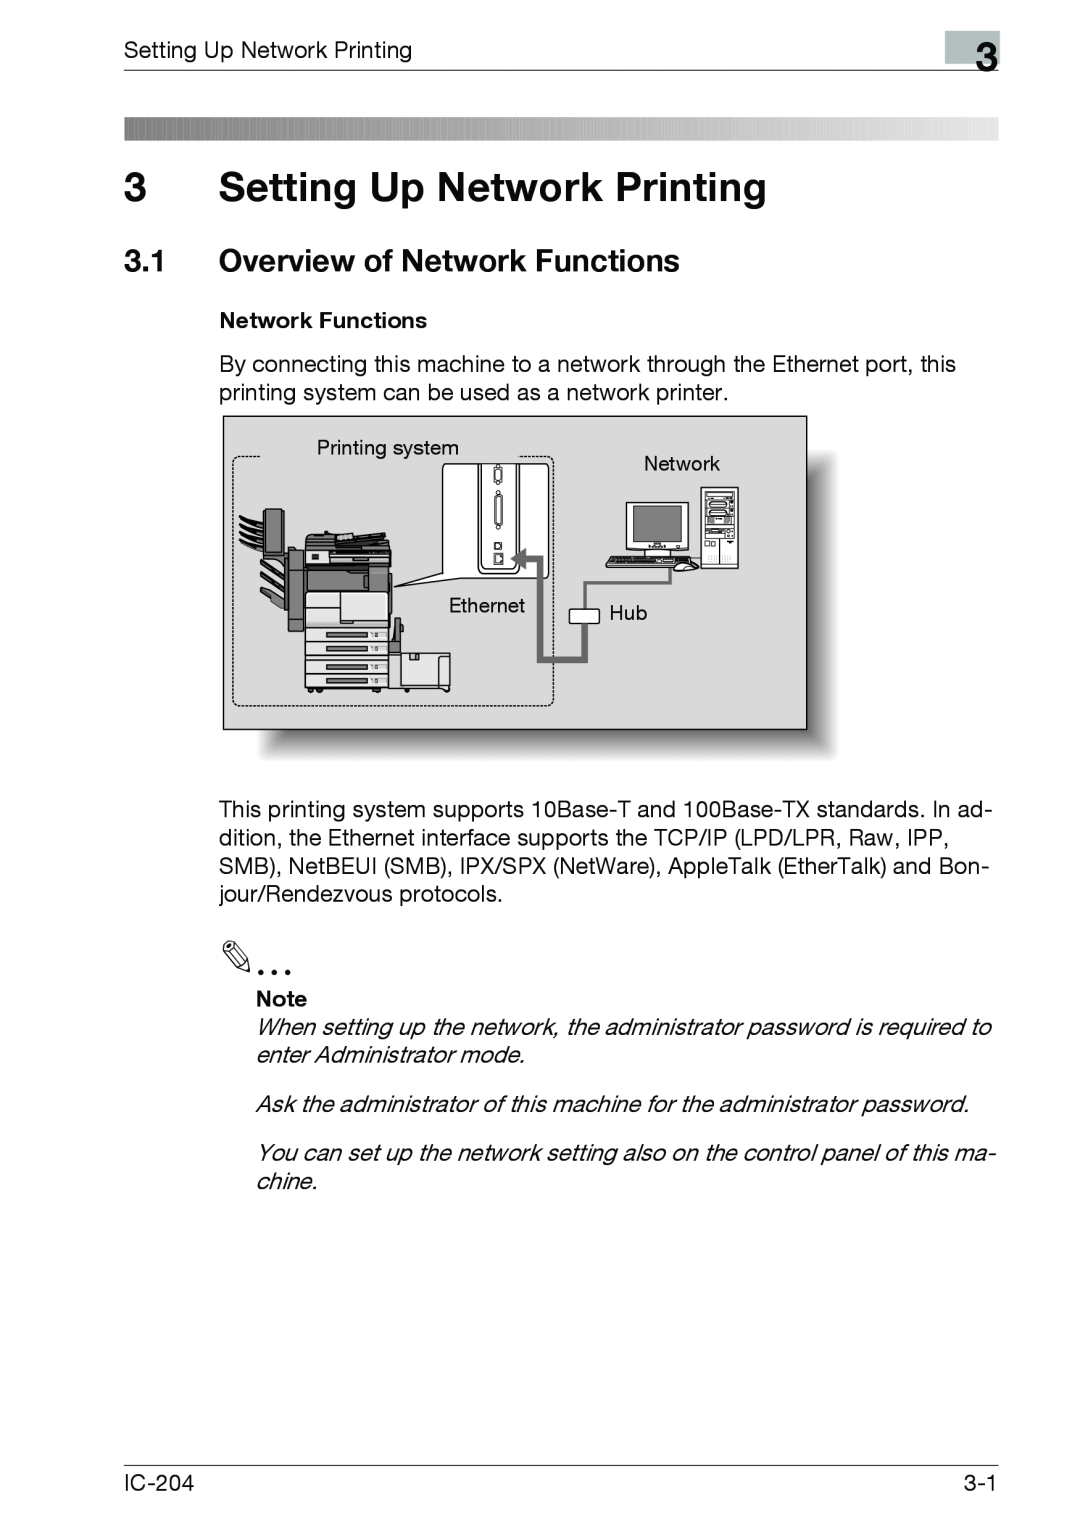 Konica Minolta IC-204 manual Setting Up Network Printing, 3.1Overview of Network Functions 